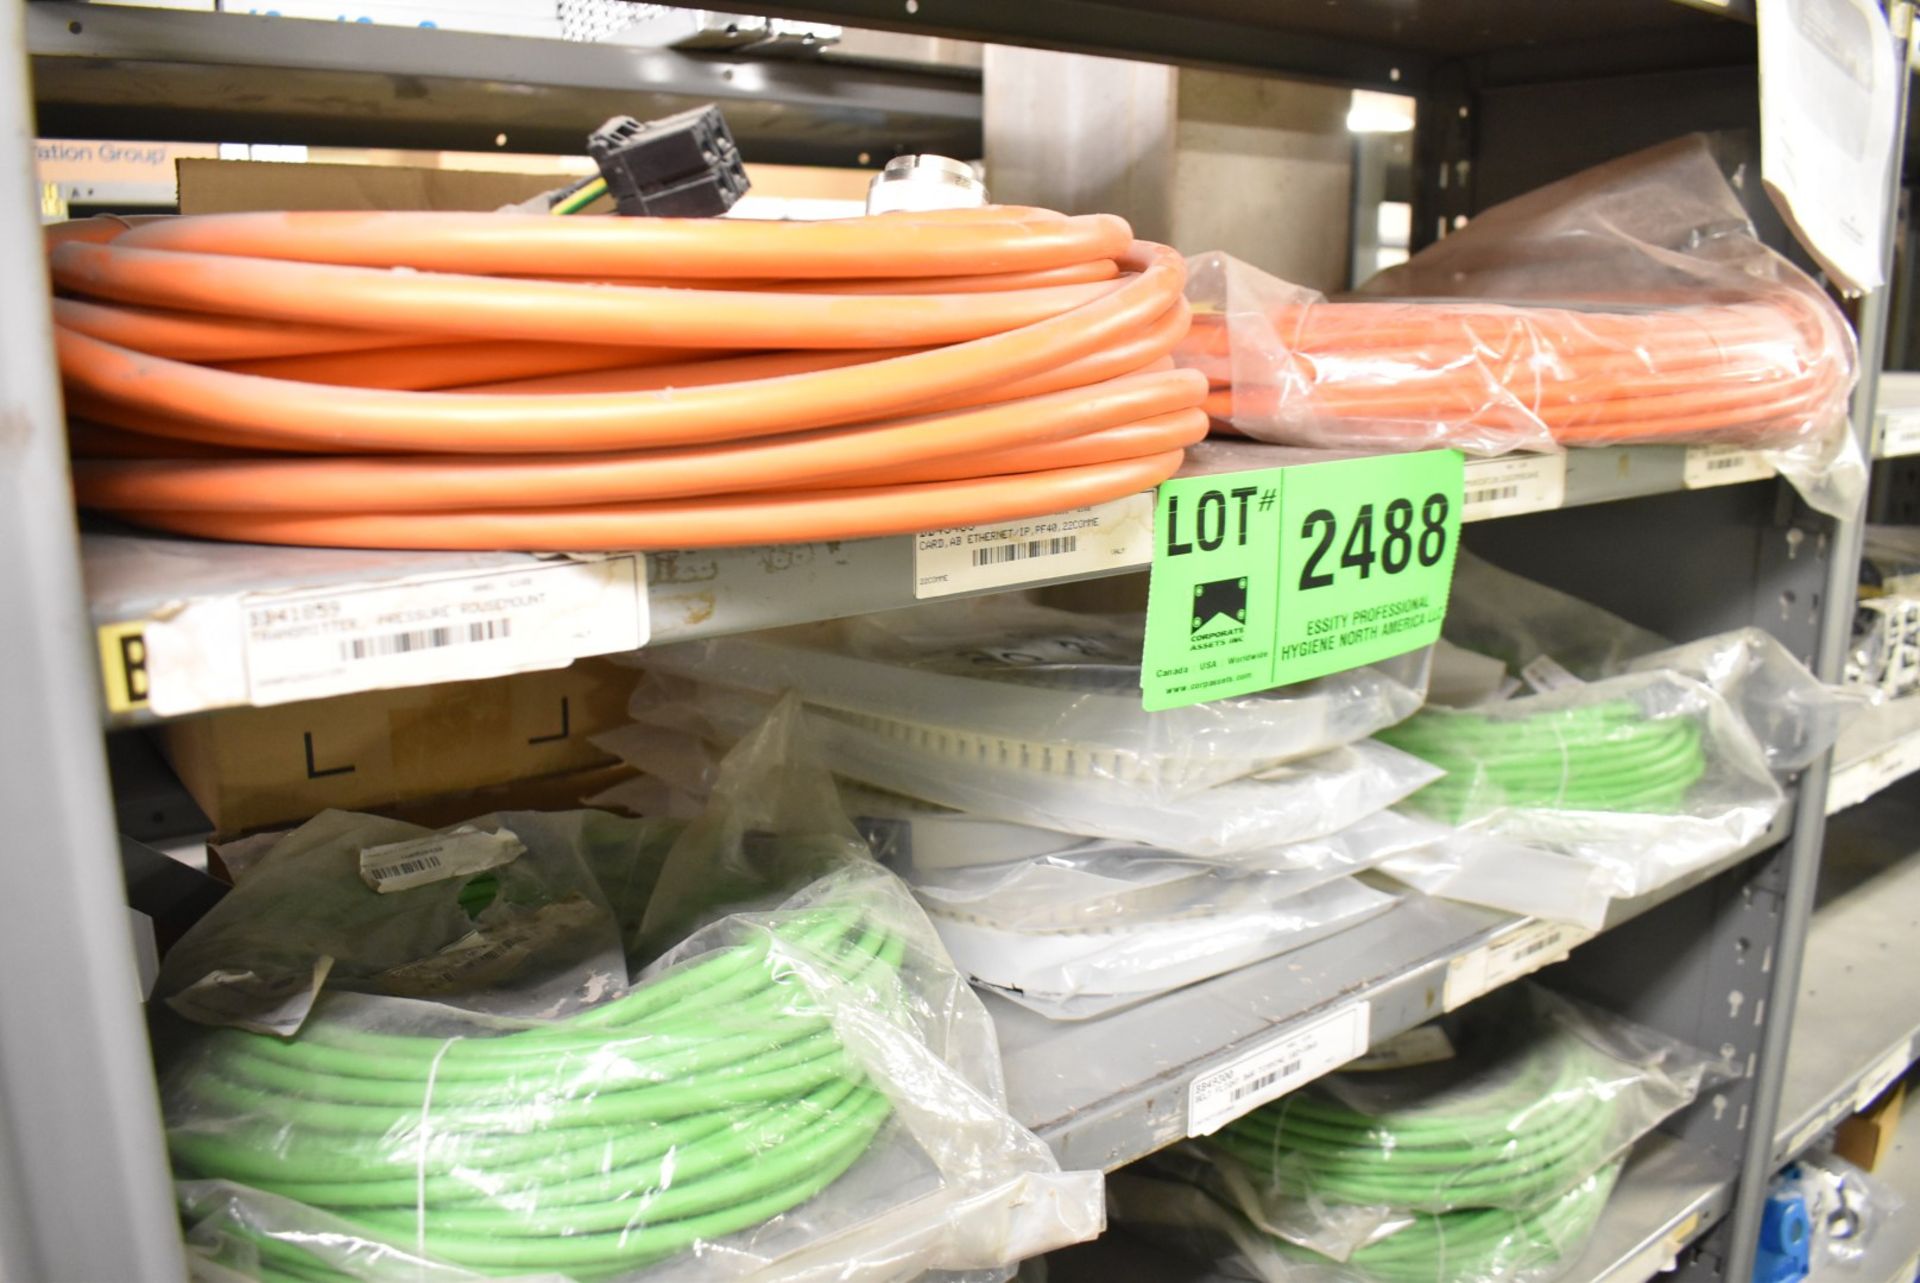 LOT/ CONTENTS OF SHELF - AUTOMATION CABLES, ROSEMOUNT 2" MAGNETIC FLOW METER, SPARE PARTS [RIGGING - Image 3 of 5